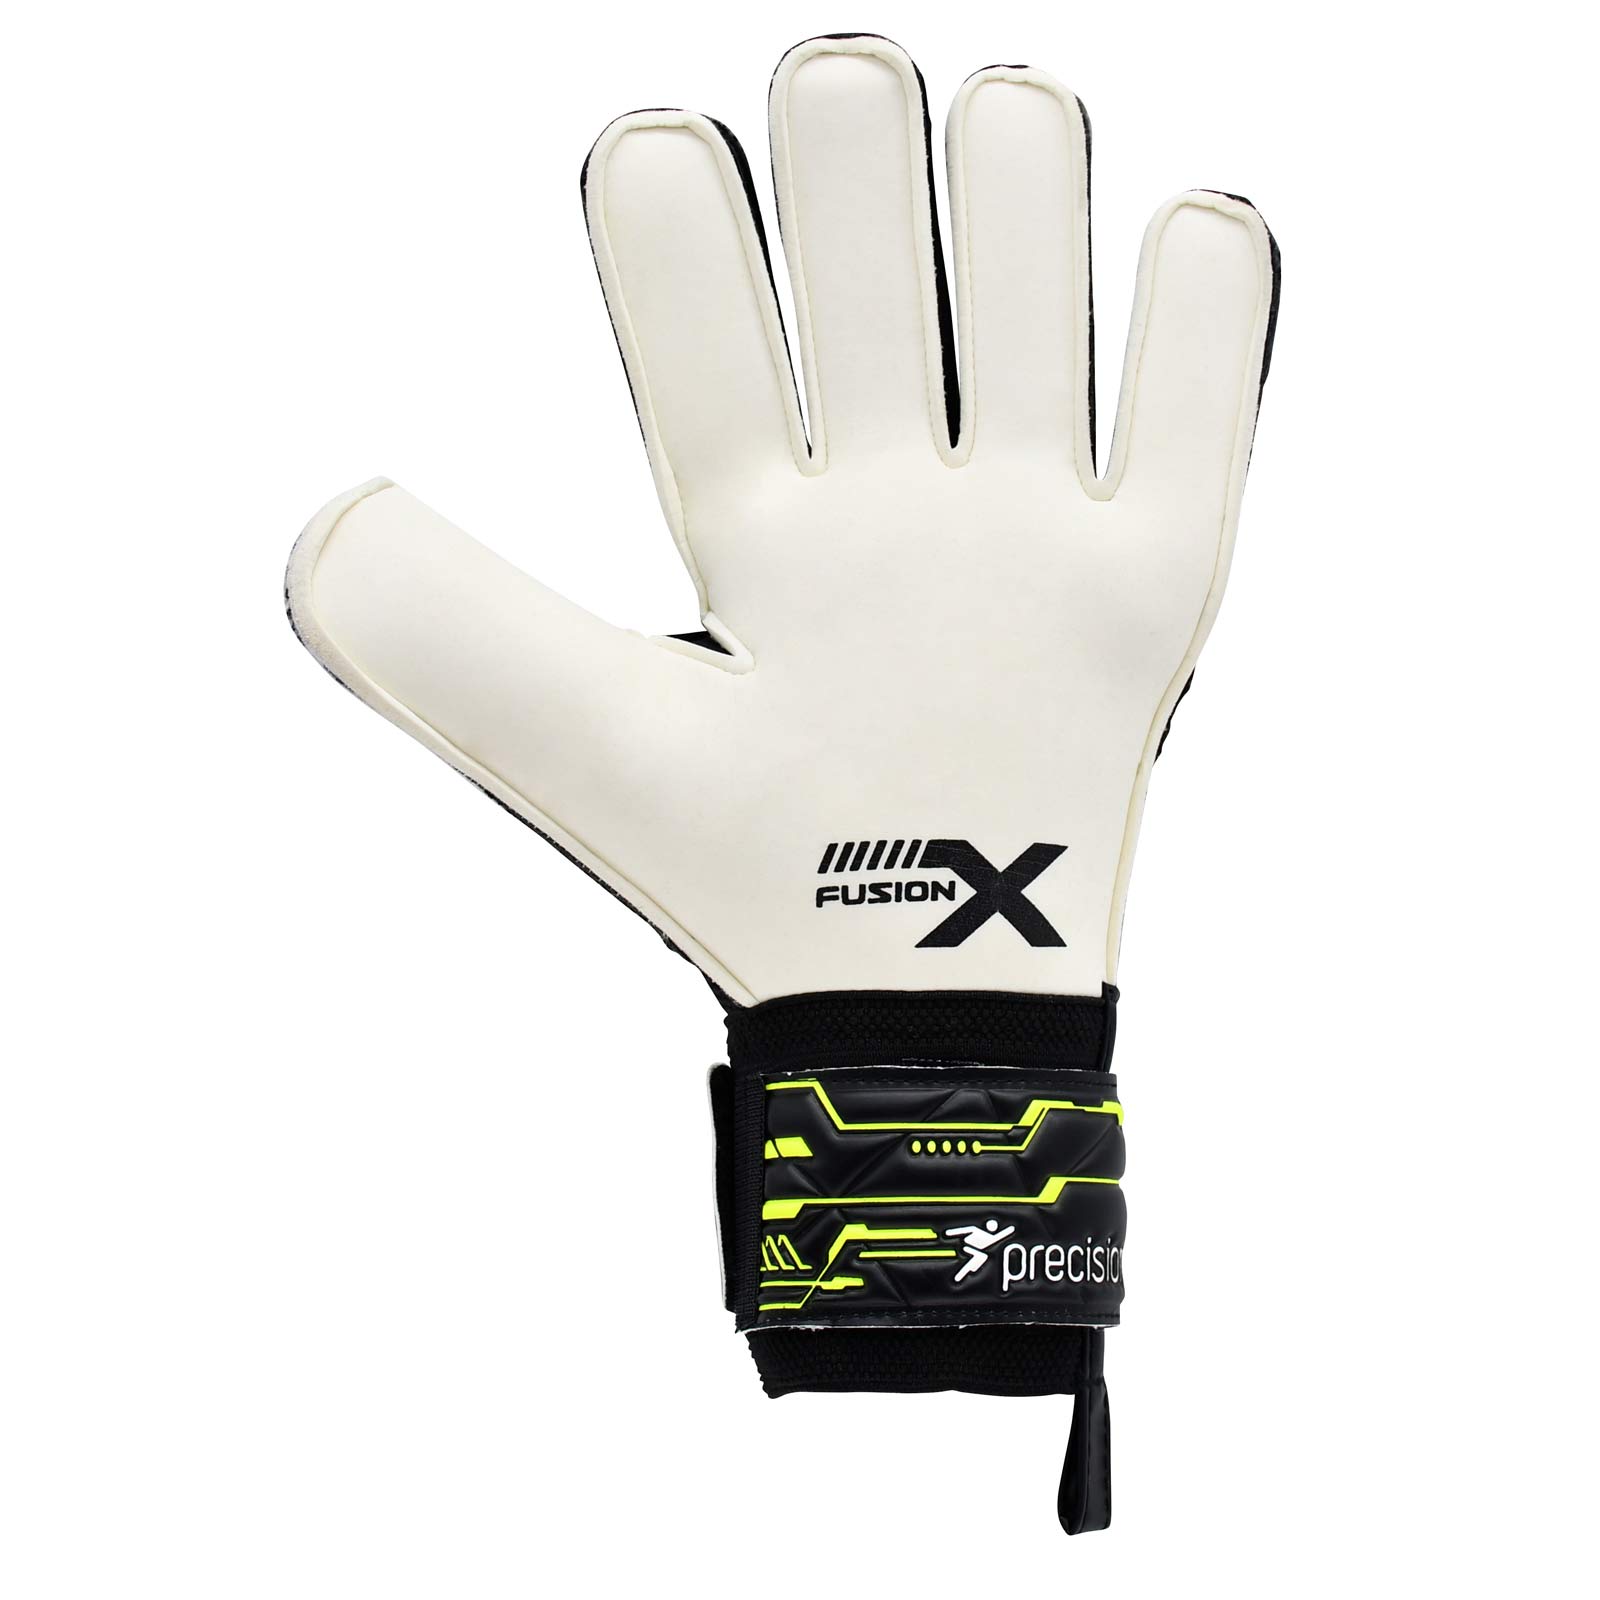 PRECISION FUSION X FLAT CUT FINGER PROTECT GOALKEEPER GLOVES